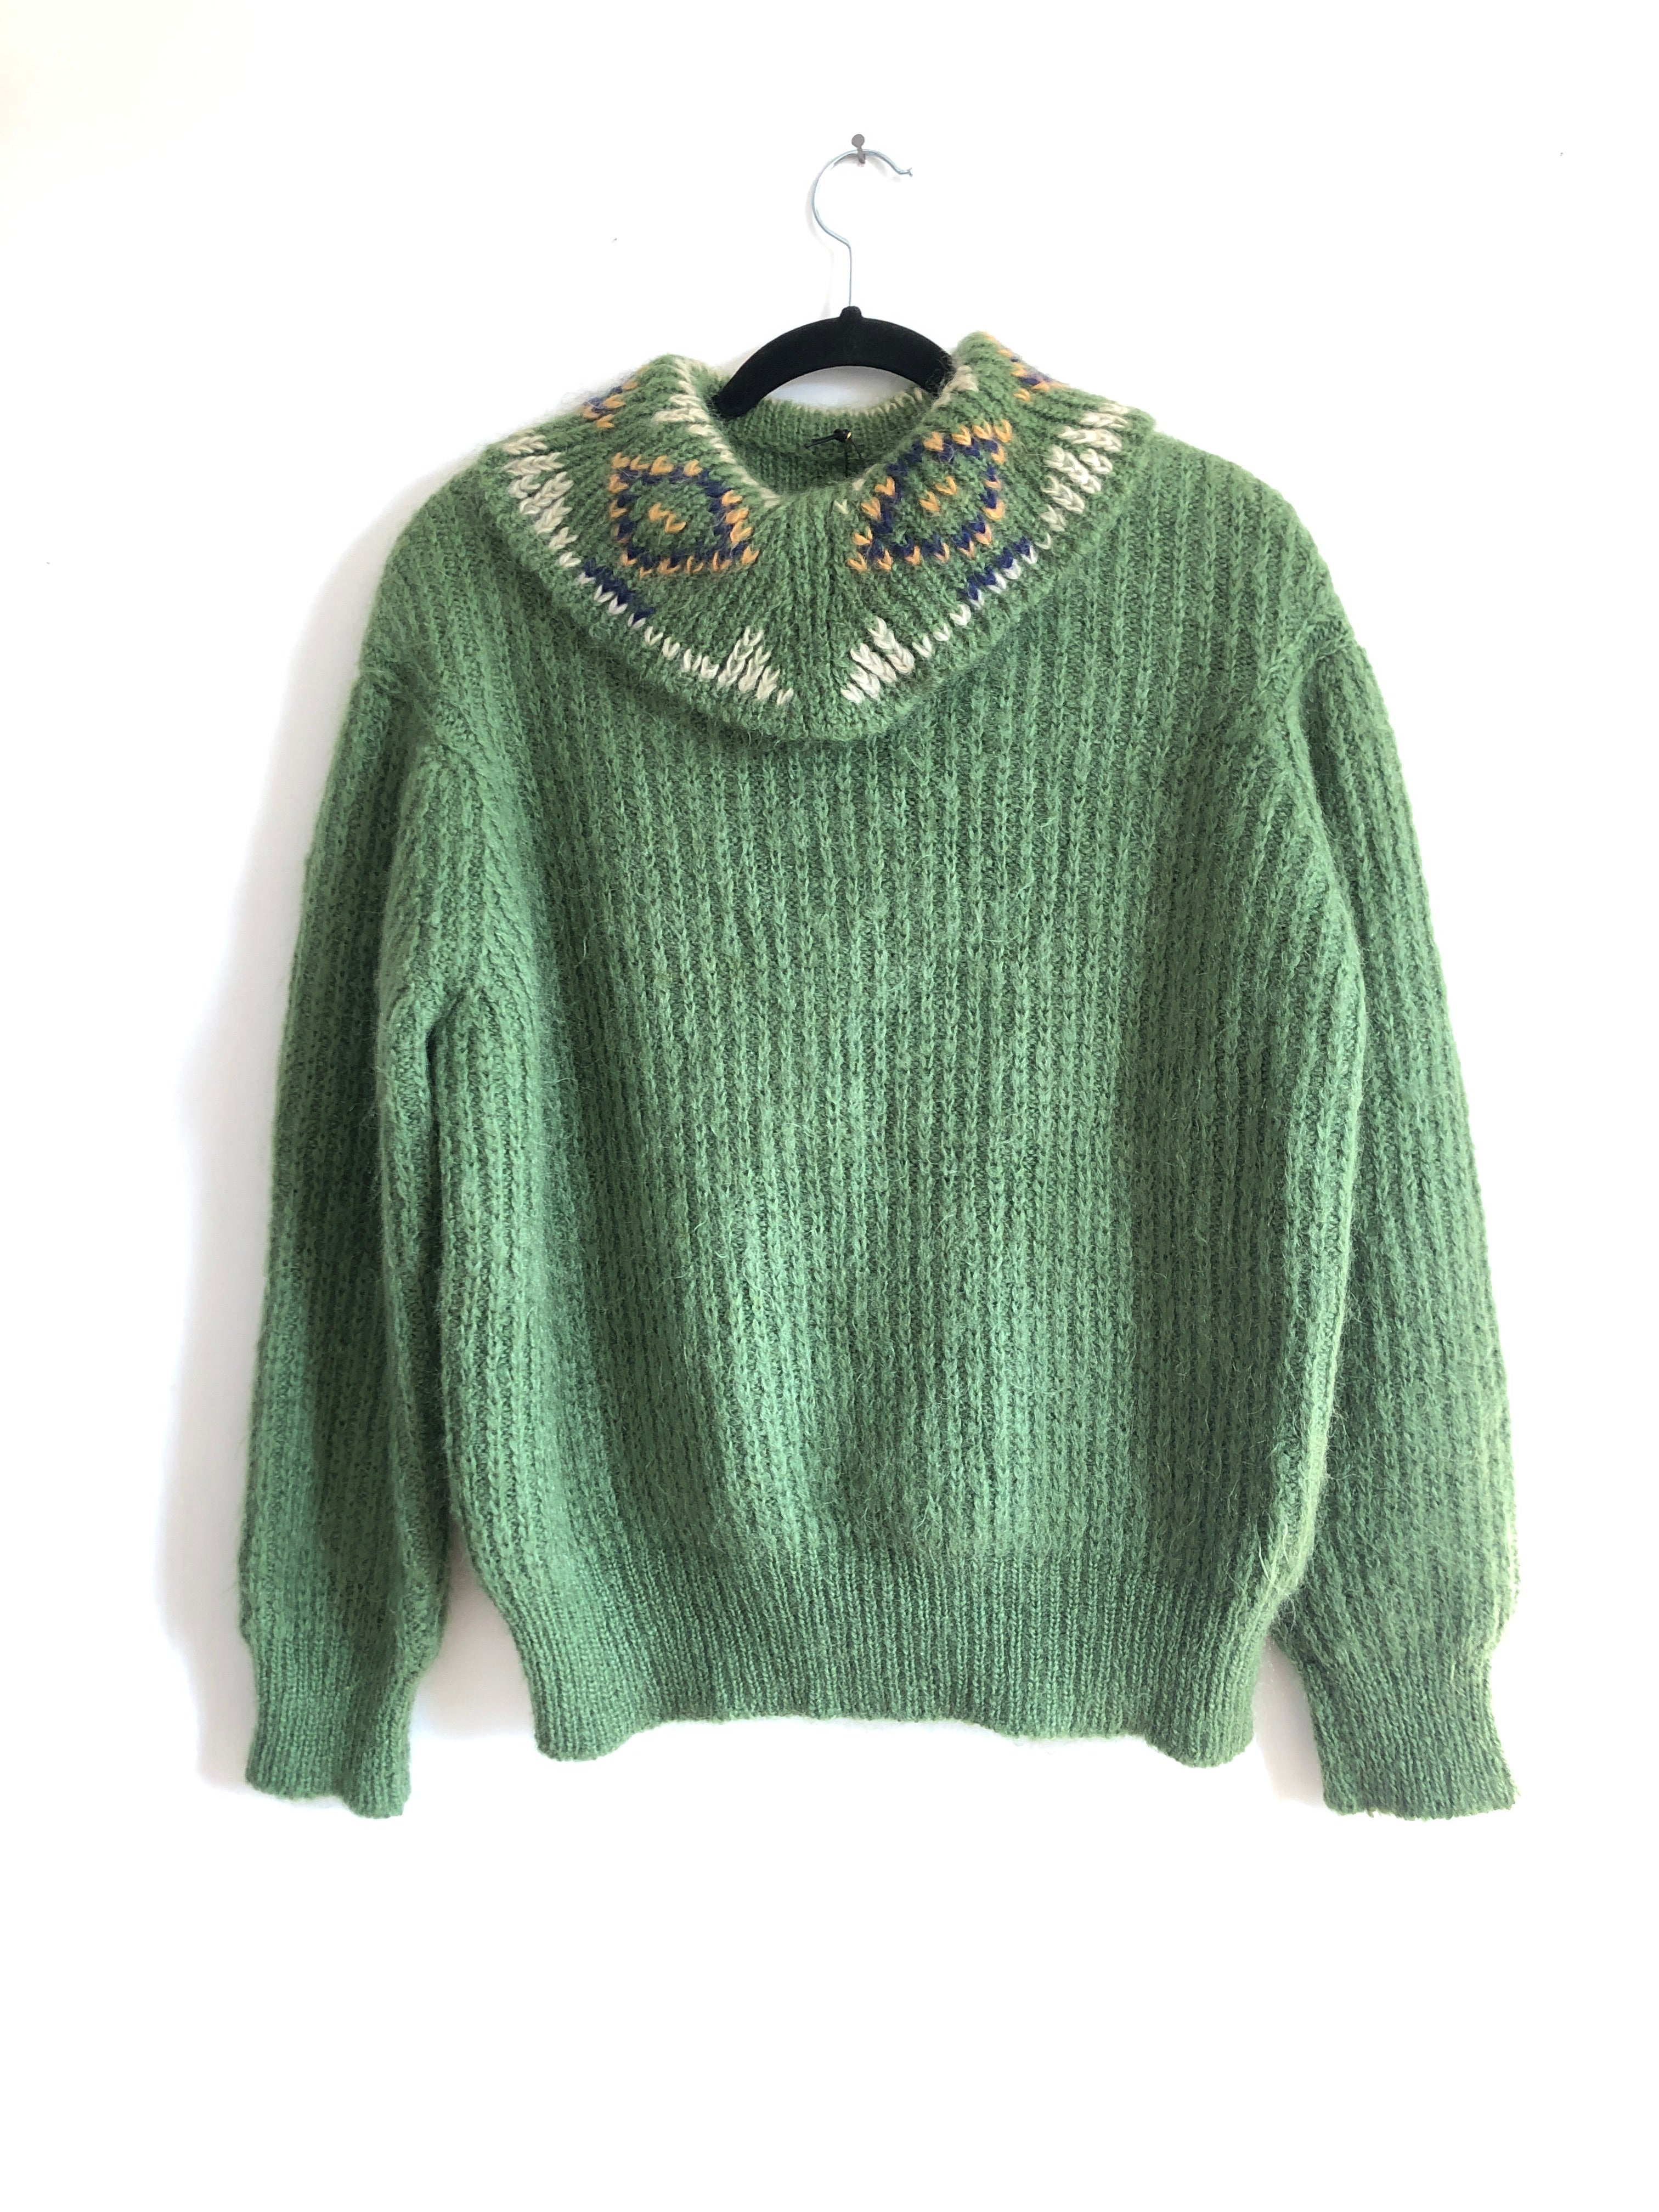 Large Mohair Sweater, Green With Baggy Fit, Fair Isle Knit Neckline